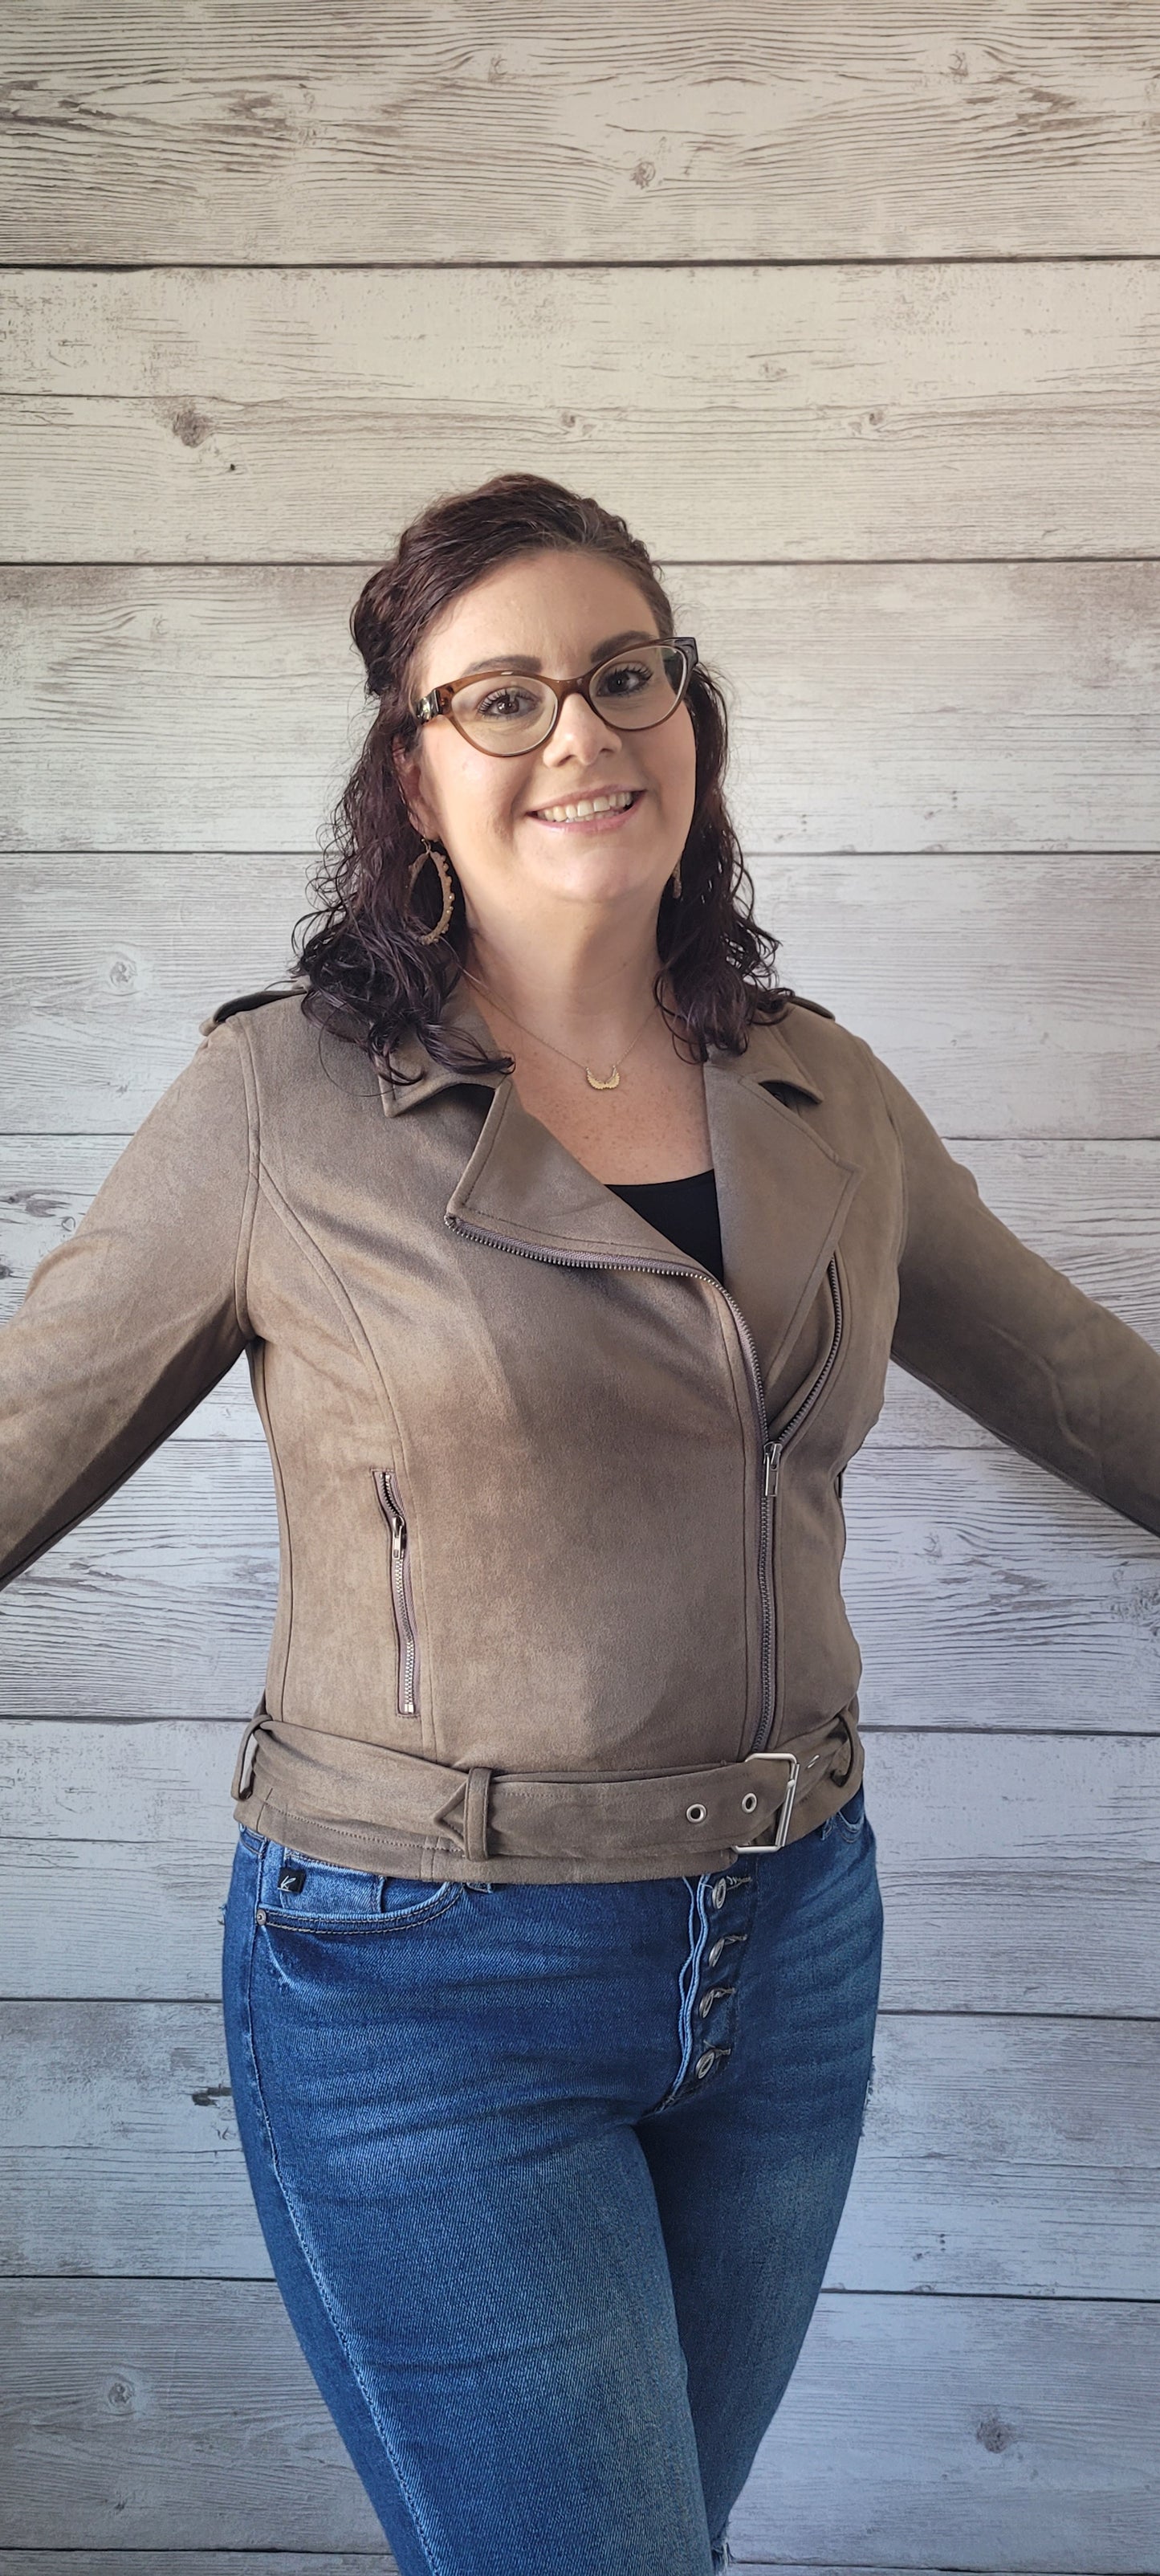 Feel cool and edgy with the "Tessa Olive Faux Suede Biker Jacket"! This classic style features zippered side pockets and waist belt to add a little bit of flavor to your look. With a zipper front closure, you'll be ready to rock n roll in no time! Look sharp, get wild, and ride off into the sunset in style! Sizes small through large.